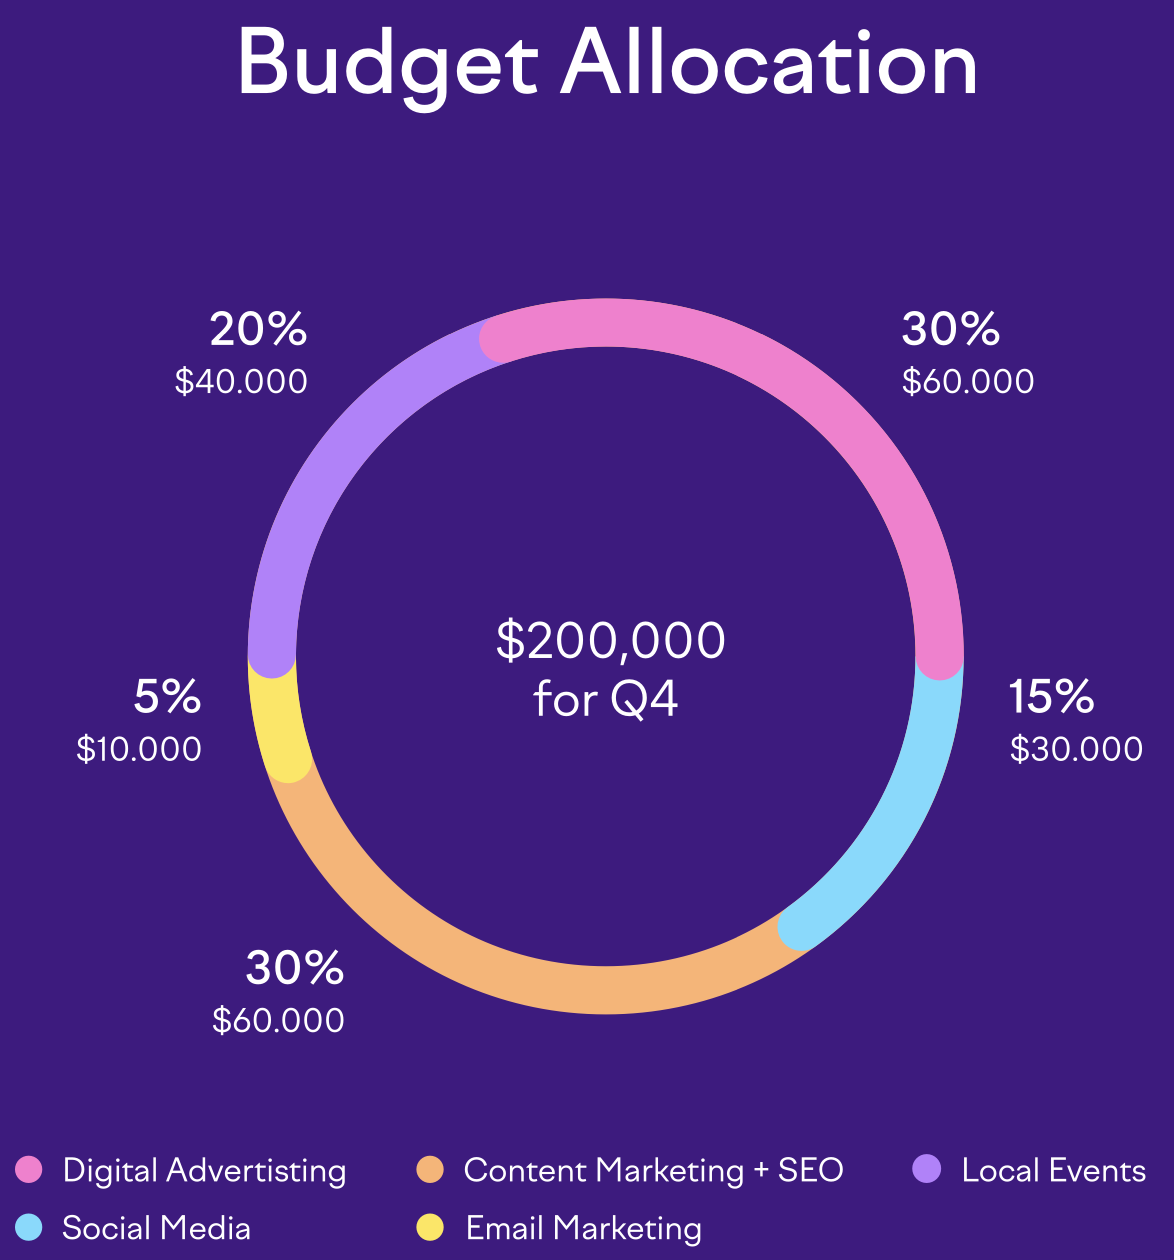 Budget allocation breakdown for the example business from the marketing plan sample